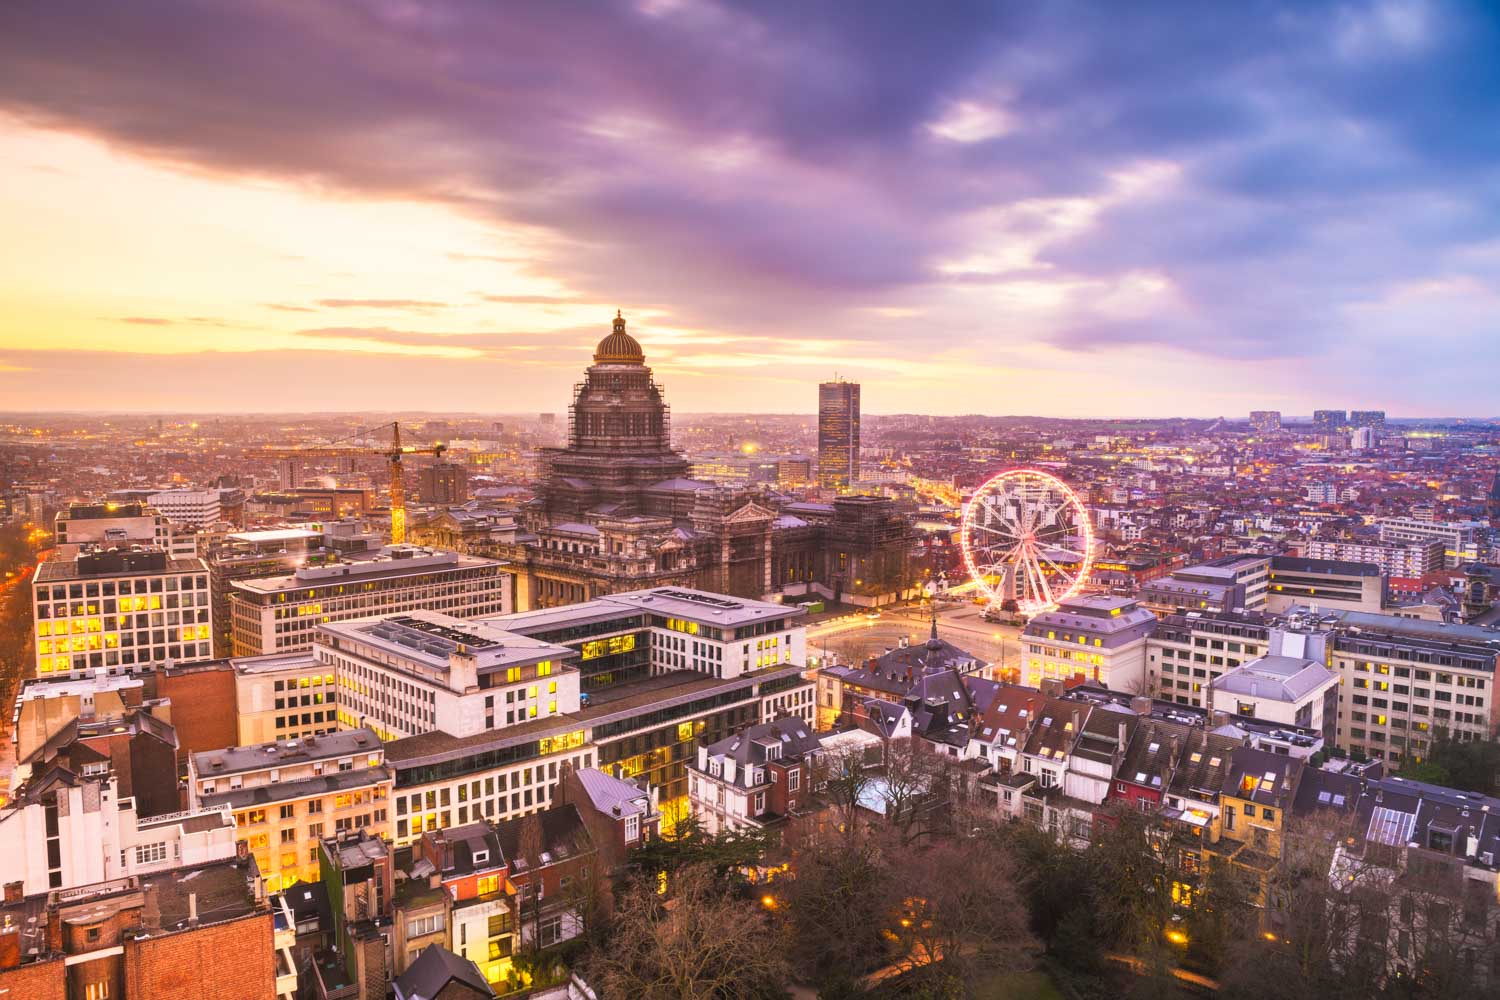 Aerial view of the cityscape of Brussels at dusk including illuminated ferries wheel and Palais de Justice - my tips on visiting Belgium with kids